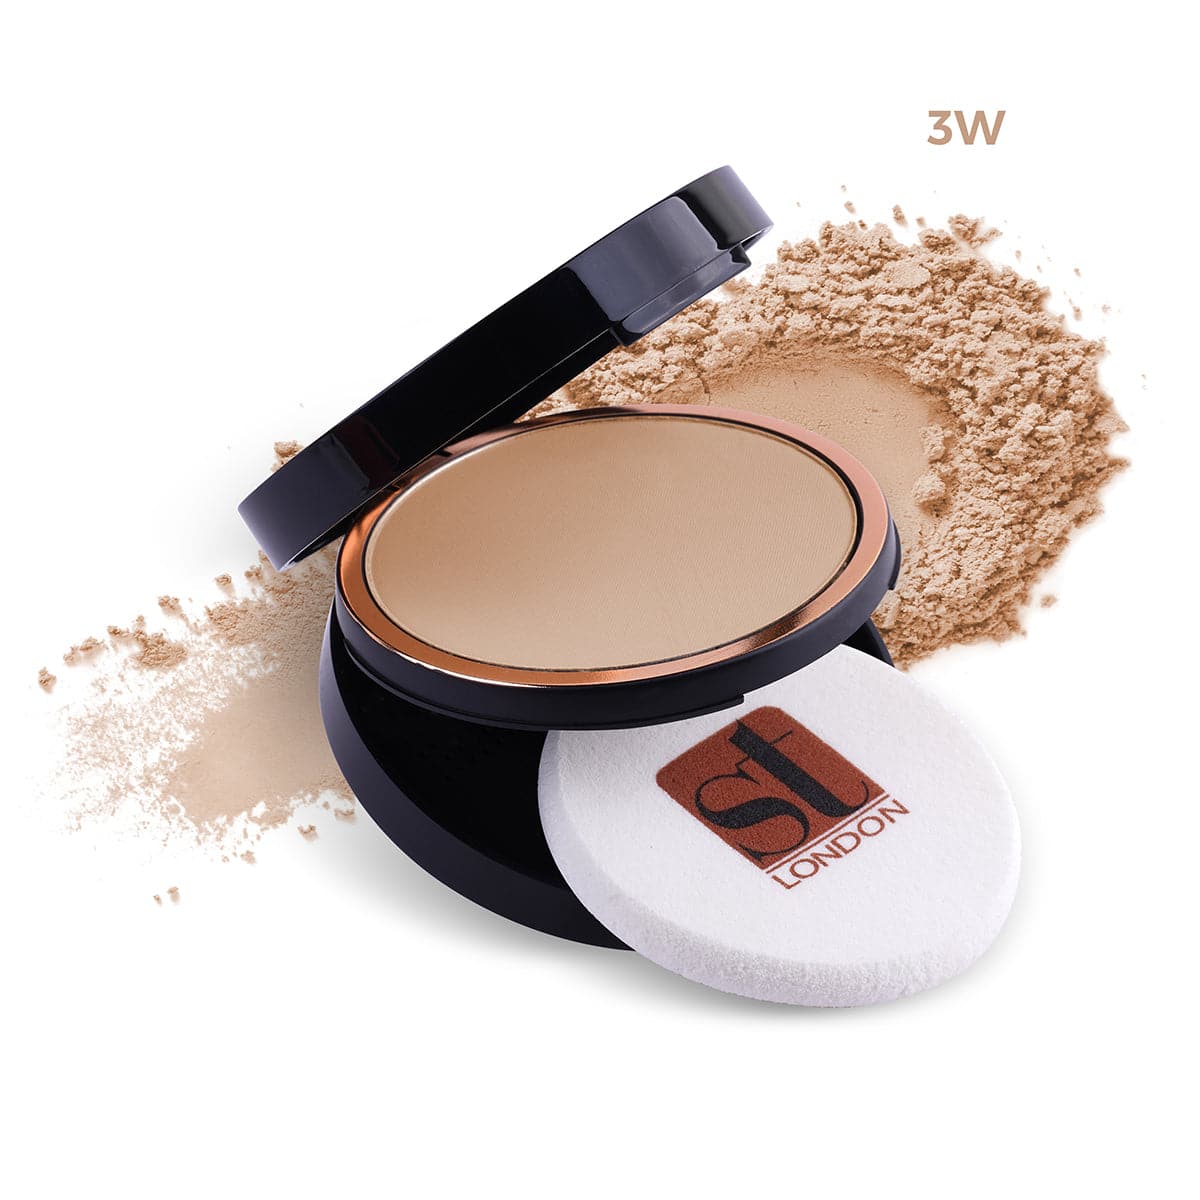 ST London Dual Wet & Dry Compact Powder - 3W - Premium Health & Beauty from St London - Just Rs 2330.00! Shop now at Cozmetica